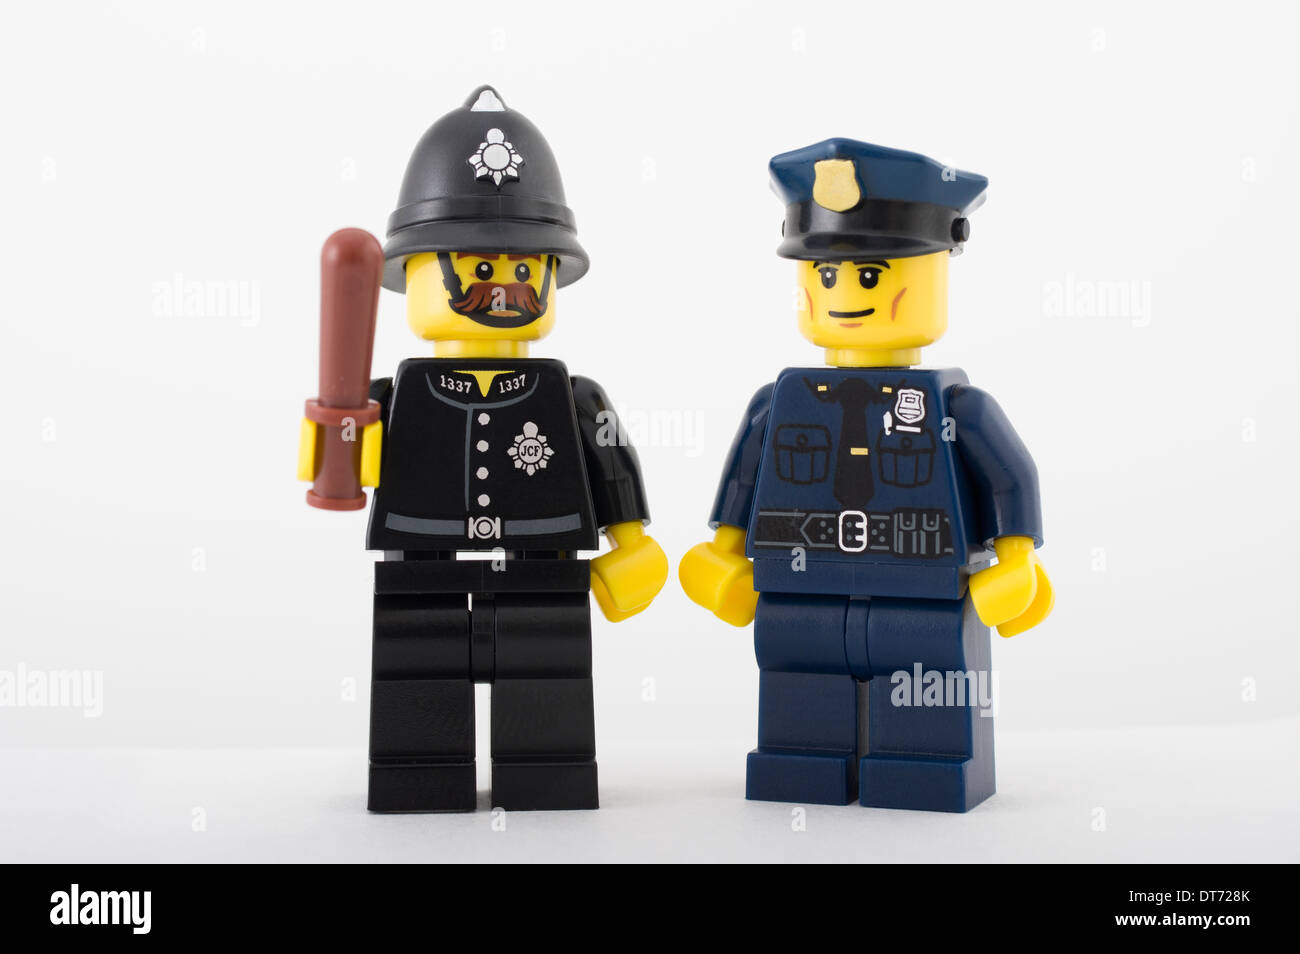 Lego Minifigure by Lego Group invented by Ole Kirk Christiansen made  Billund Denmark Stock Photo - Alamy